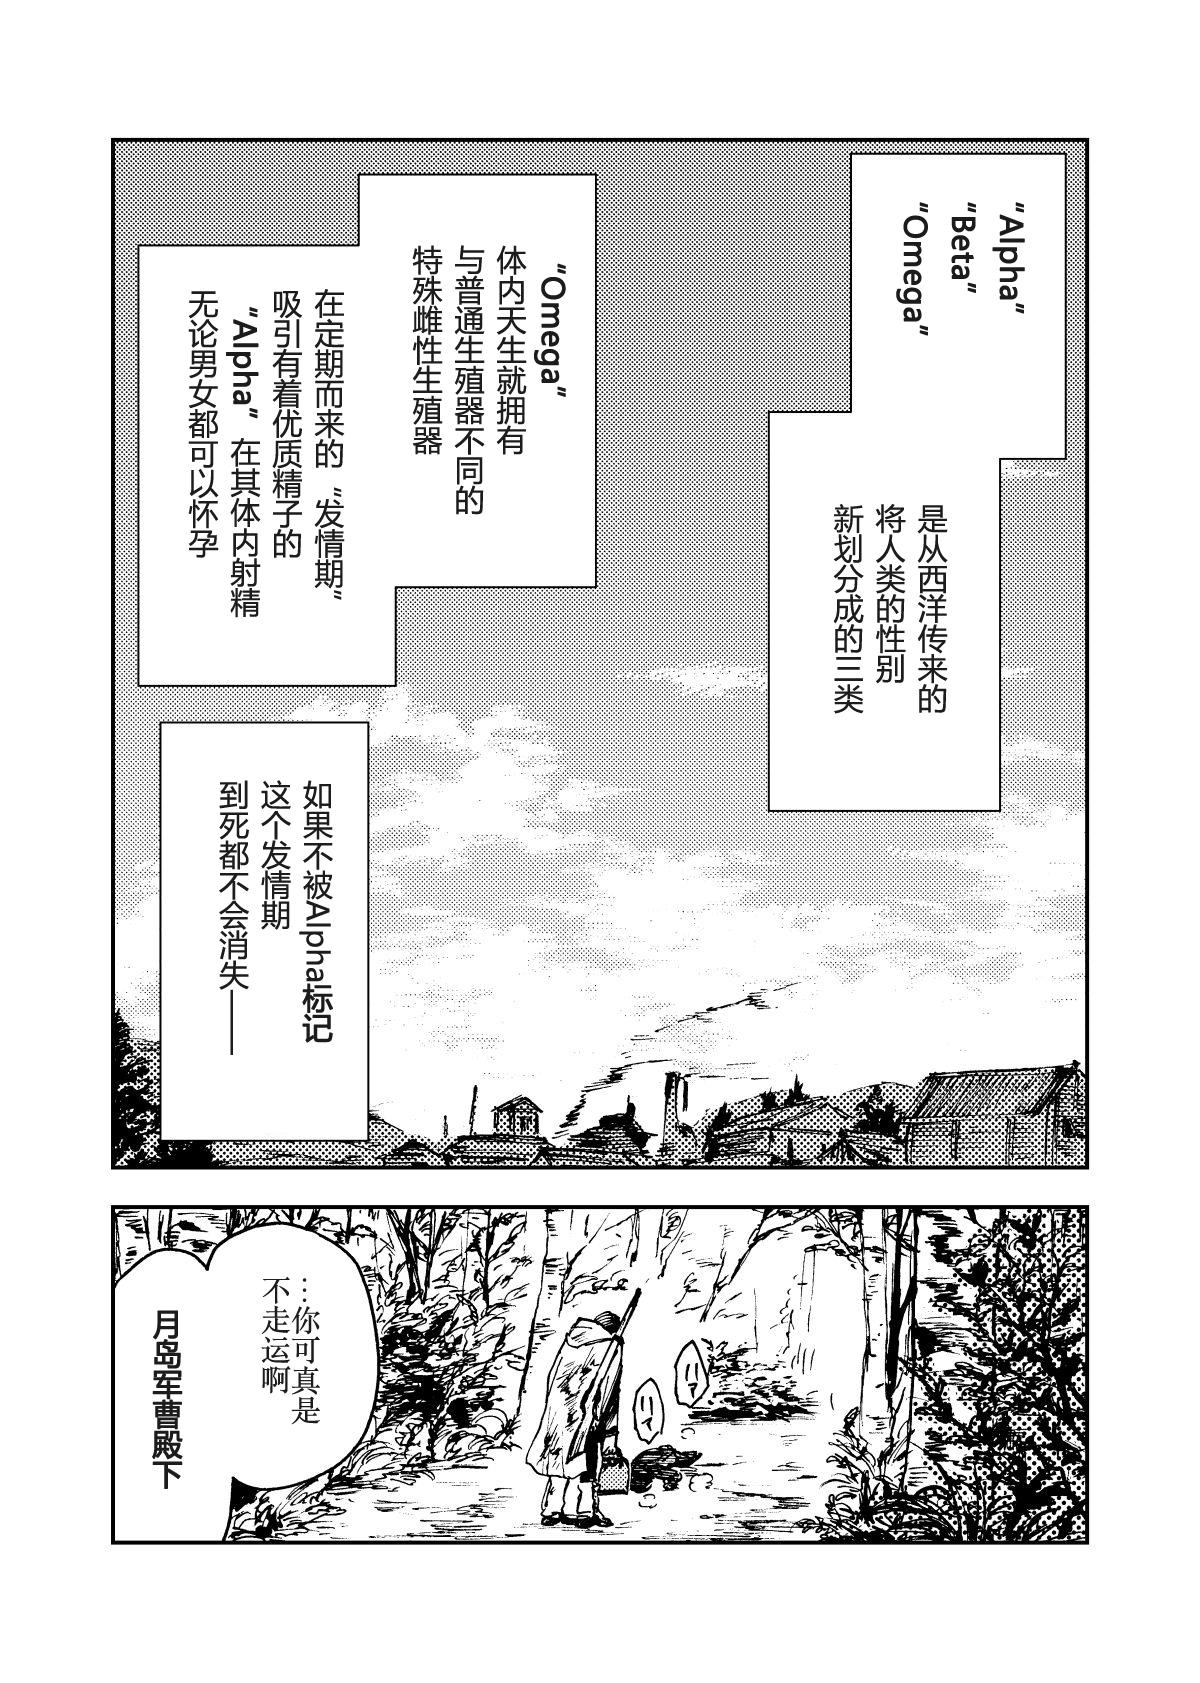 Real Sex （自汉化）啸猫弄月（Chinese） - Golden kamuy Ano - Page 2